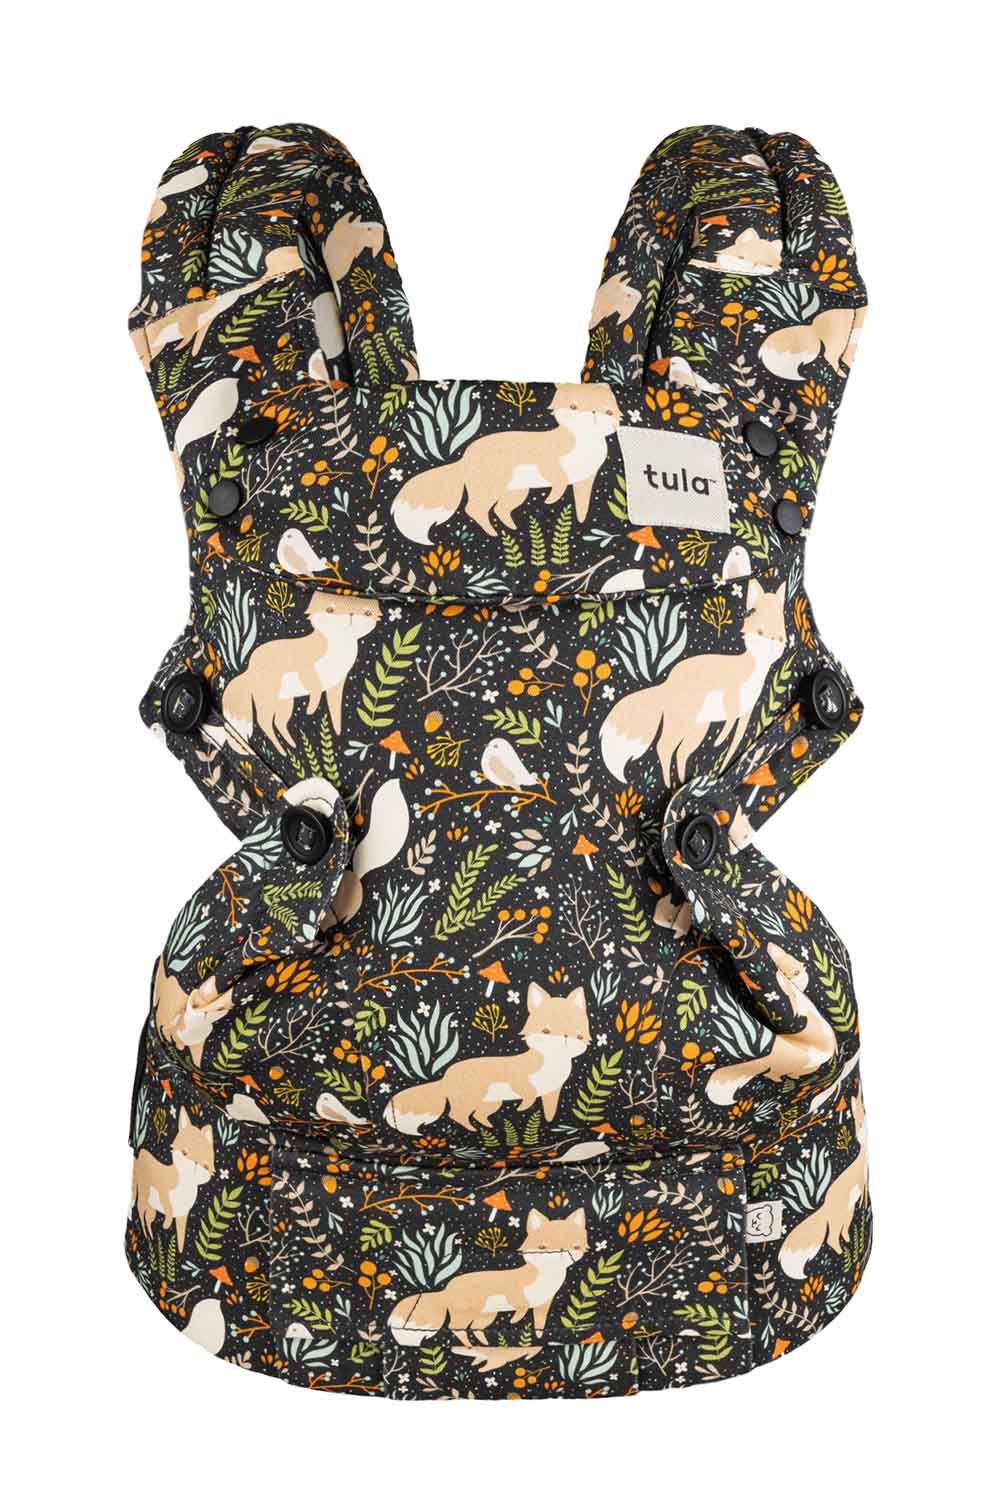 Forward Facing Tula Explore Baby Carrier Fox Tail - fox pattern against green and organge foliage and brown background.